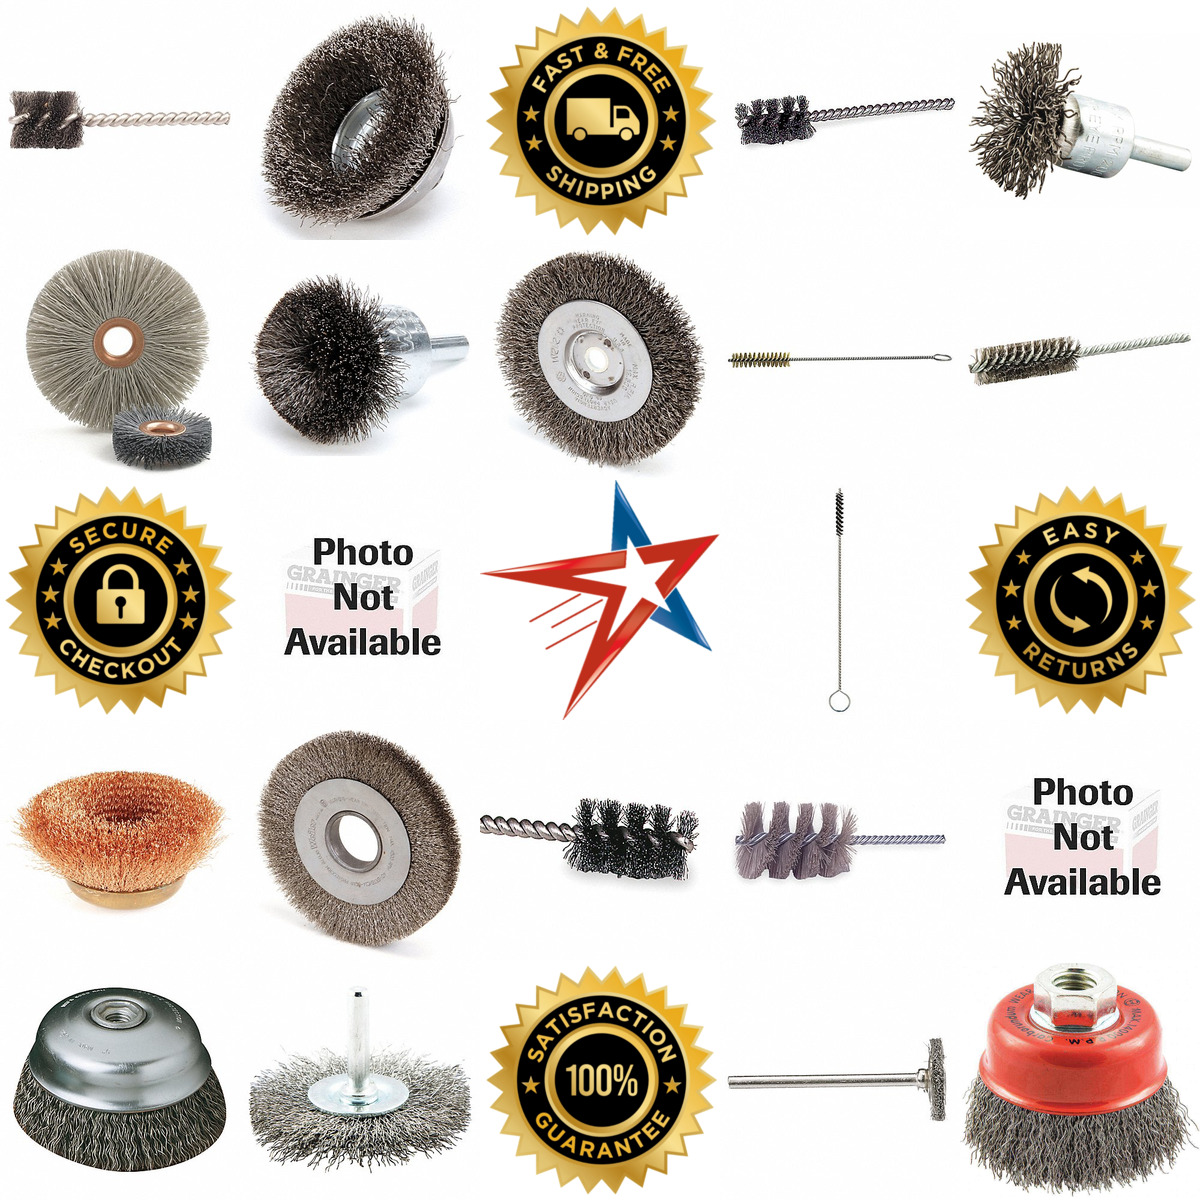 A selection of Abrasive Brushes and Wheel Kits products on GoVets